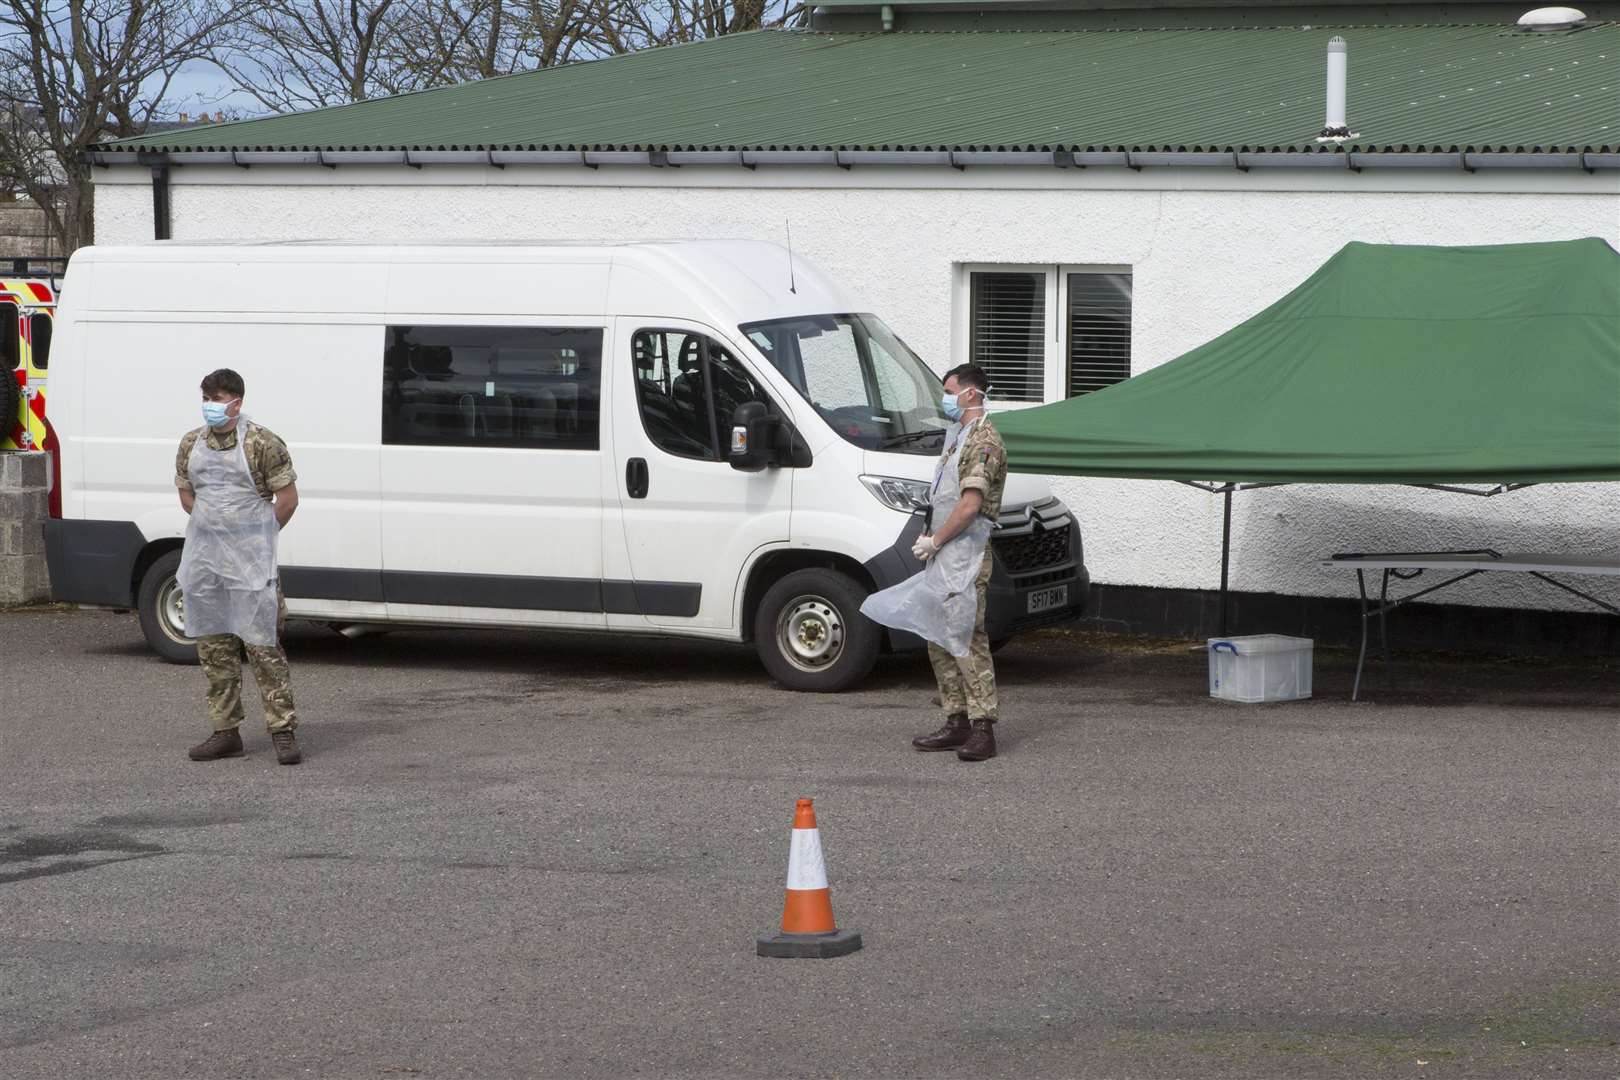 Army personnel at the Covid-19 mobile testing centre in Thurso's Millbank Road on Wednesday. Picture: Robert MacDonald / Northern Studios